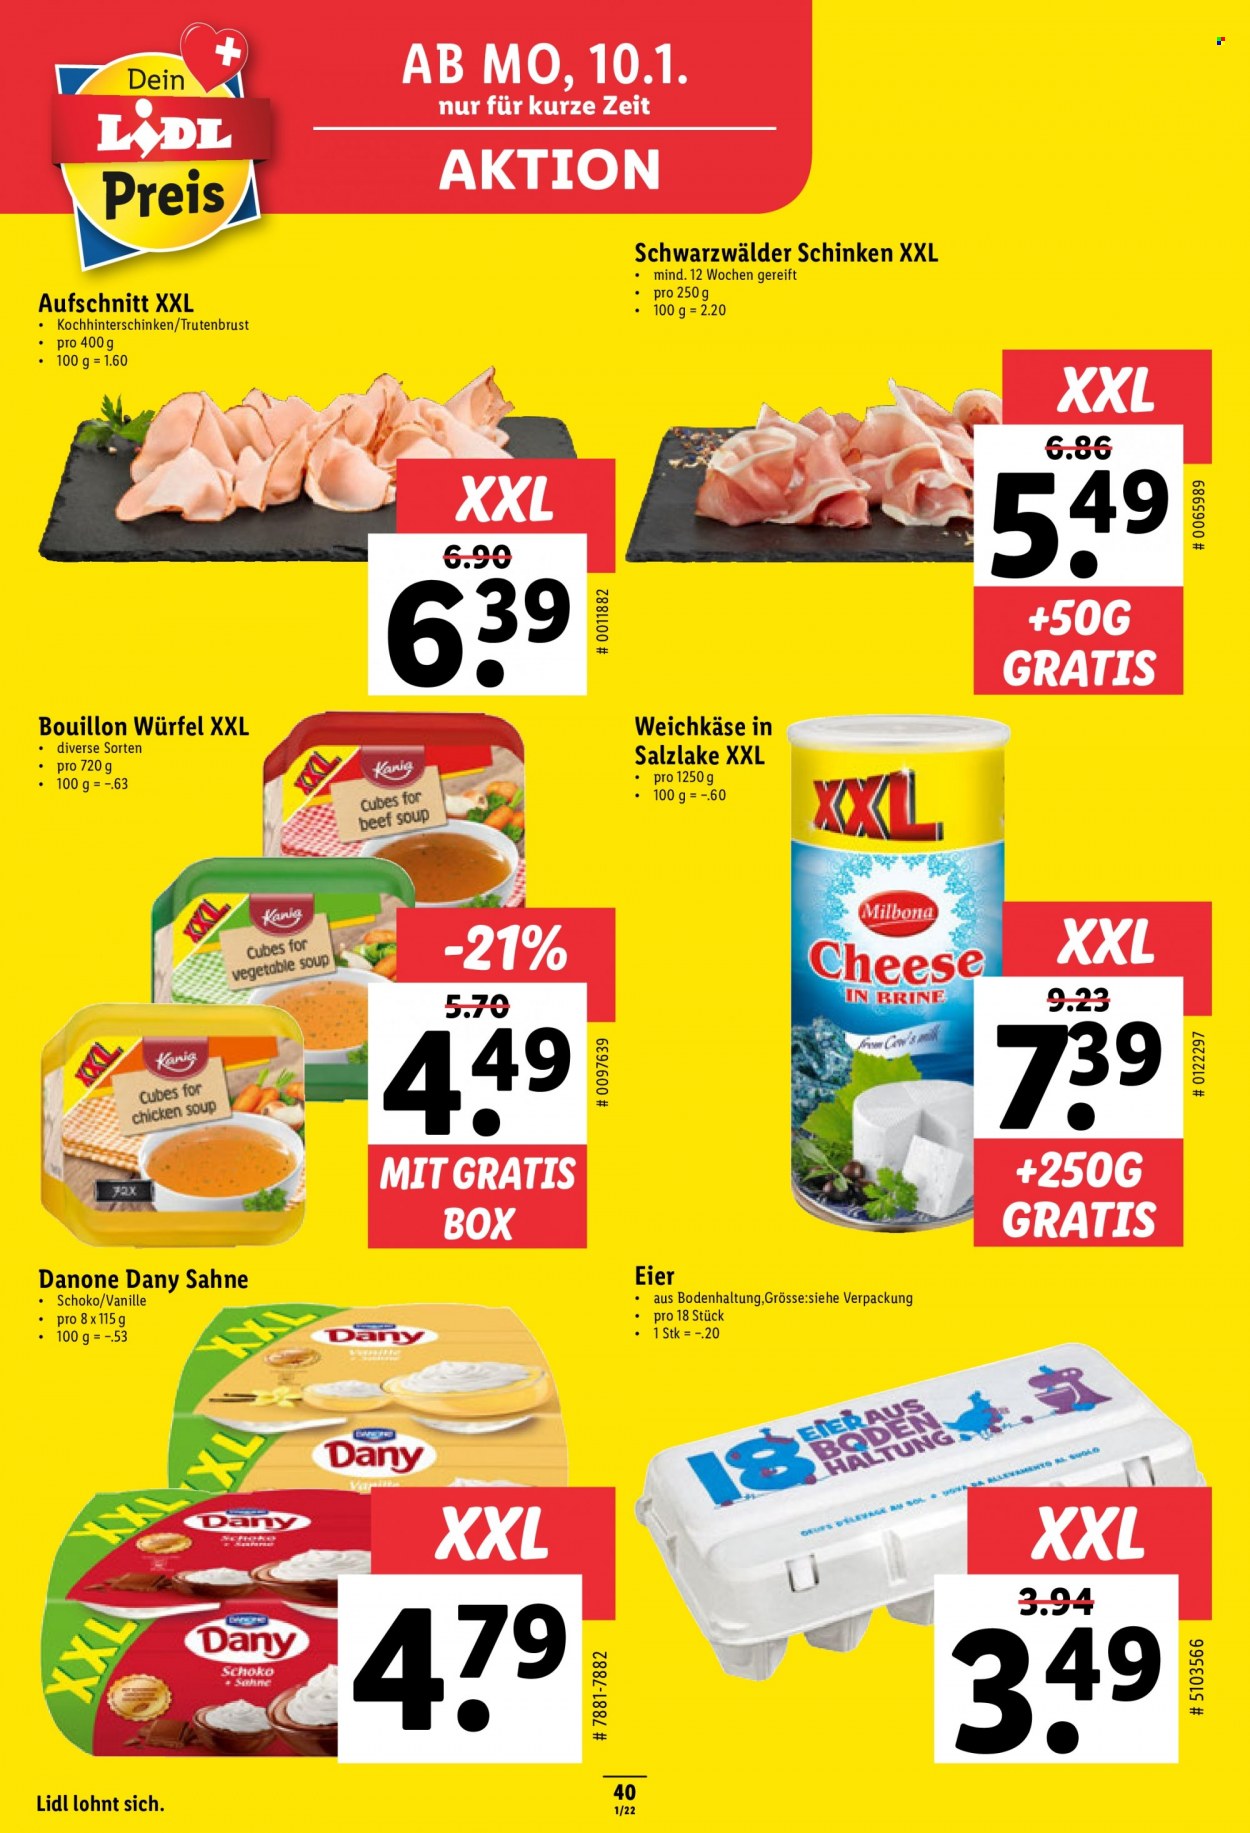 Catalogue Lidl - 6.1.2022 - 12.1.2022. Page 40.